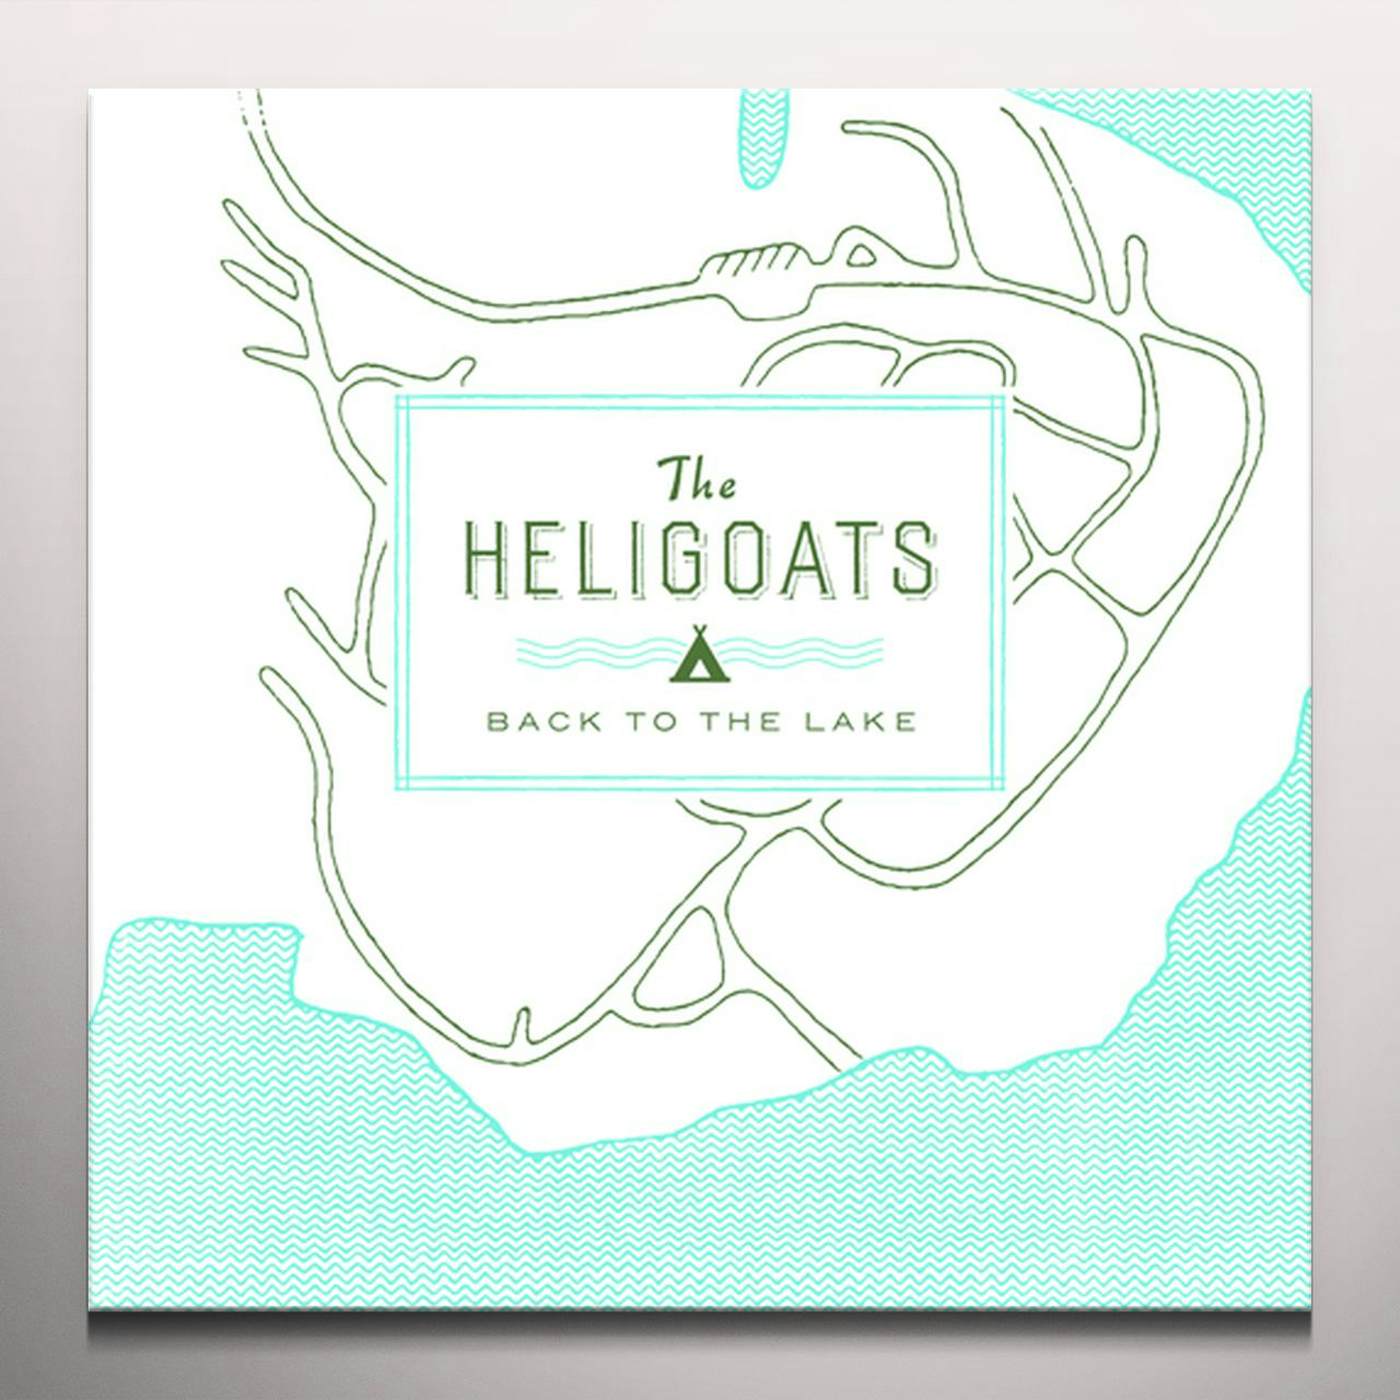 The Heligoats Back to the Lake Vinyl Record